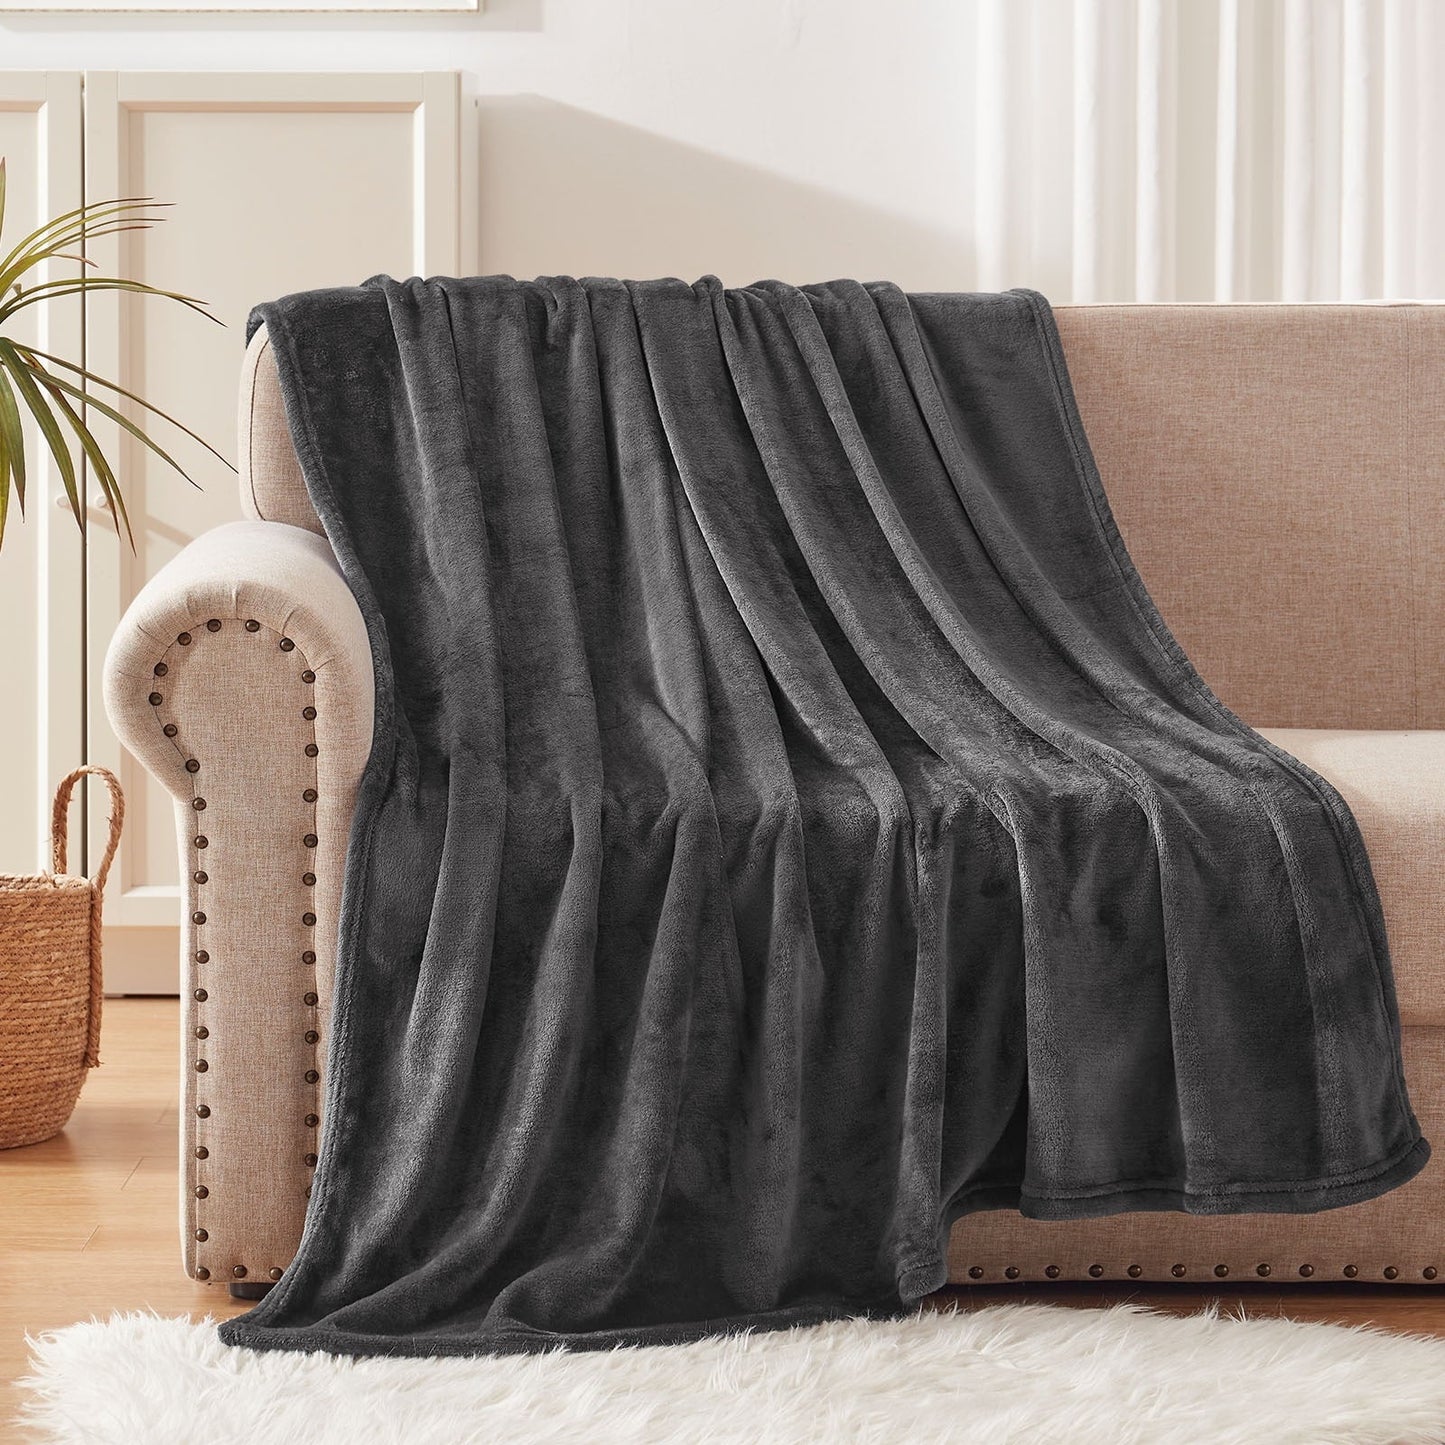 Exclusivo Mezcla Fleece Throw Blanket for Couch/Sofa/Bed,Plush Soft Blankets and Throws,Lightweight and Cozy-50" x 60" ( Grey )